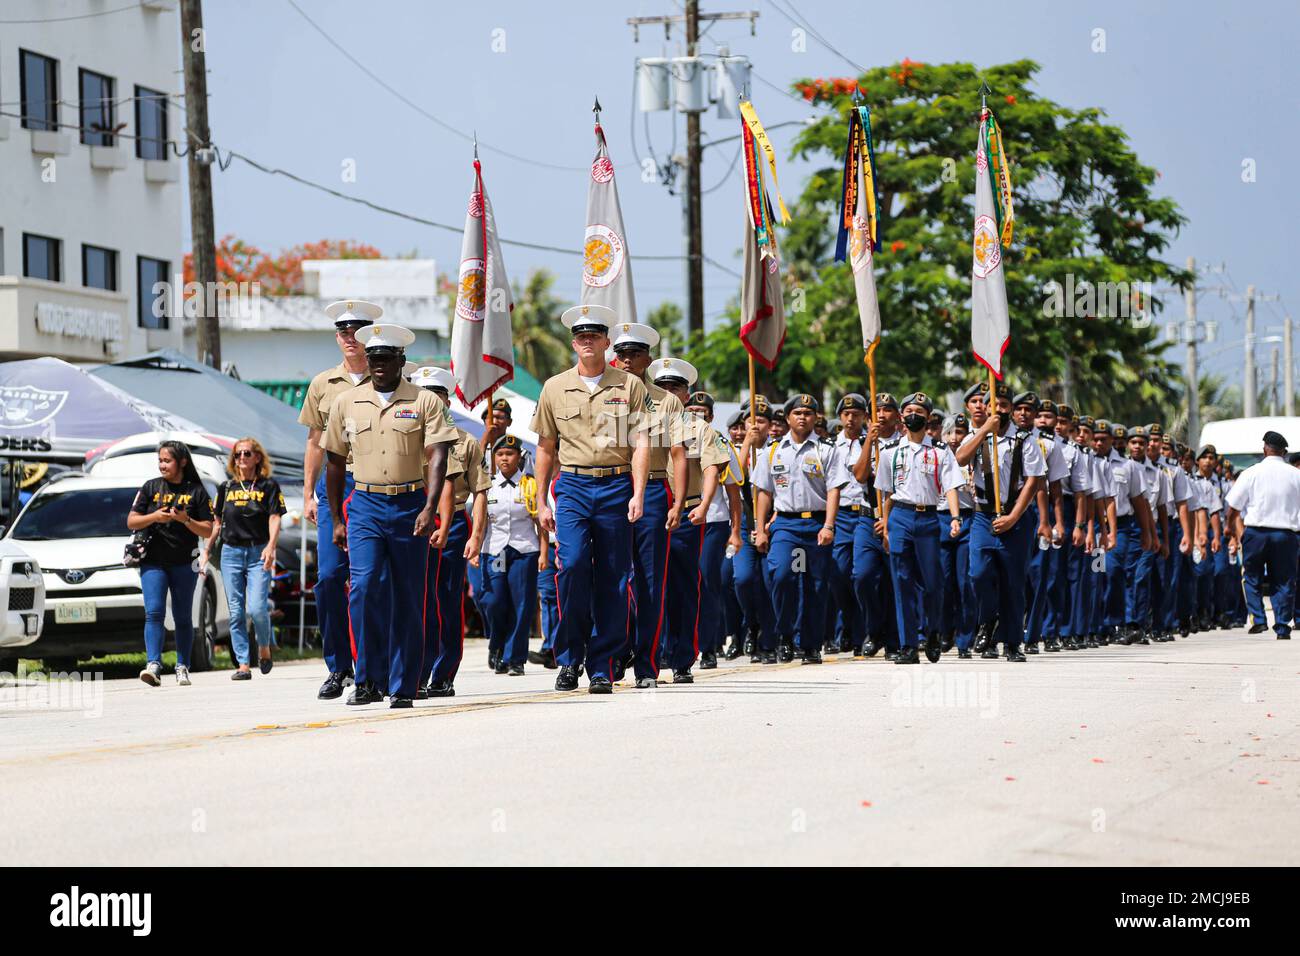 U.S. Marines assigned to Marine Corps Base Camp Blaz, participate in Saipan’s 76th Liberation Day parade held in Garapan, Saipan, July 4, 2022. Marines with the 2nd Marine Division, 4th Marine Division, and the Army’s 27th Infantry Division, participated in the Battle of Saipan lasting for 24 days from June 15 to July 9, 1944. Saipan’s Liberation Day commemorates the permanent closure of civilian internment camps on July 4, 1946. Stock Photo